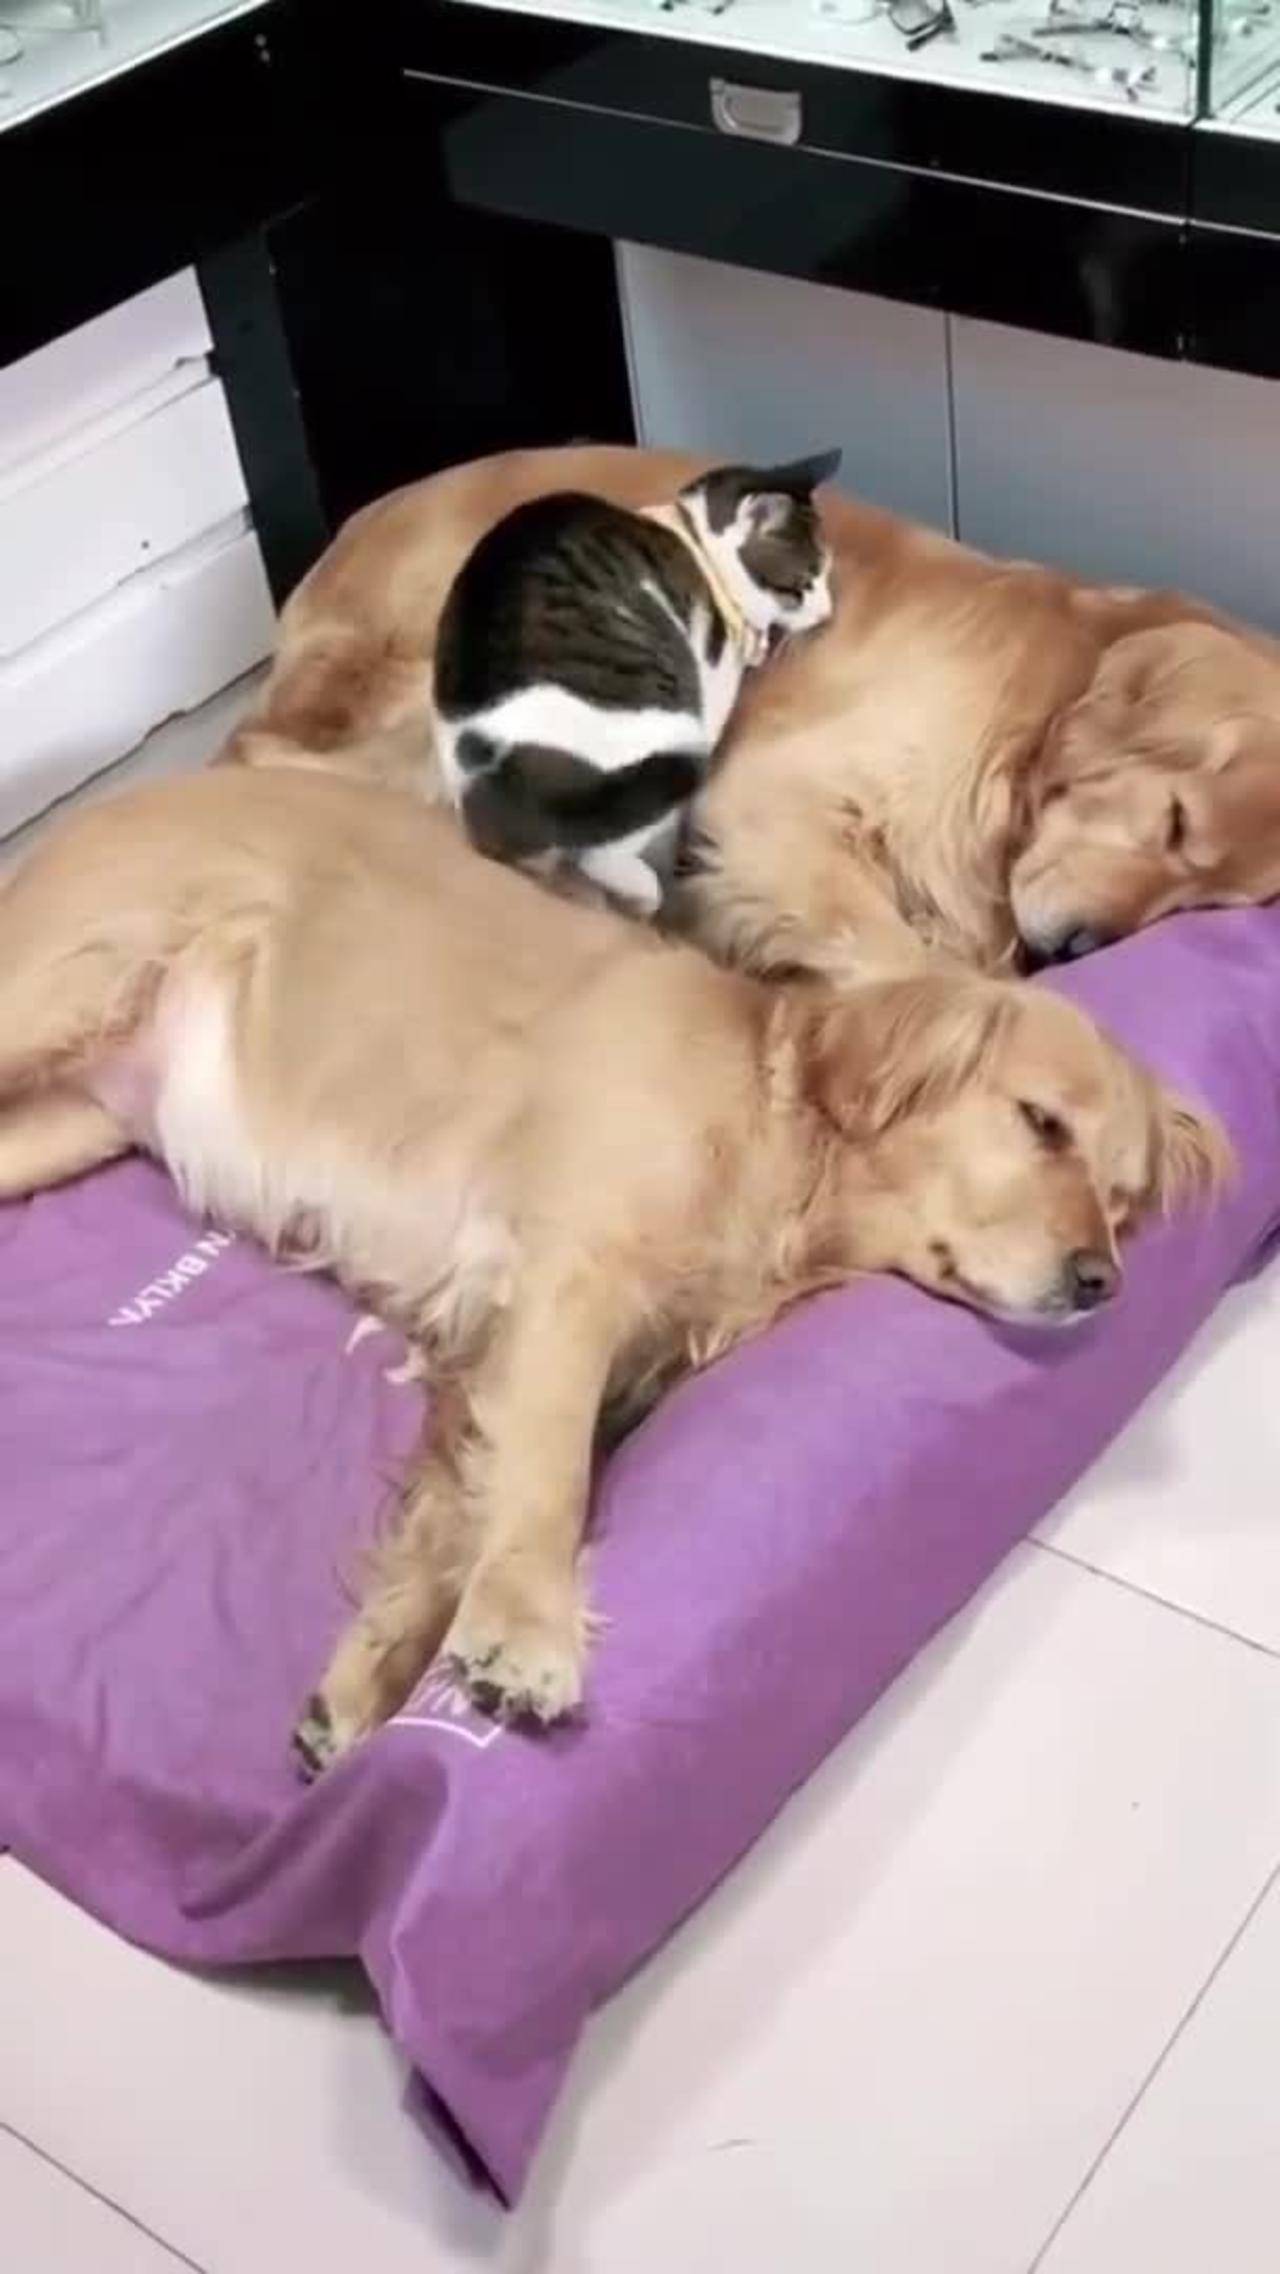 Dog cat funny video😅😂🥰 - One News Page VIDEO